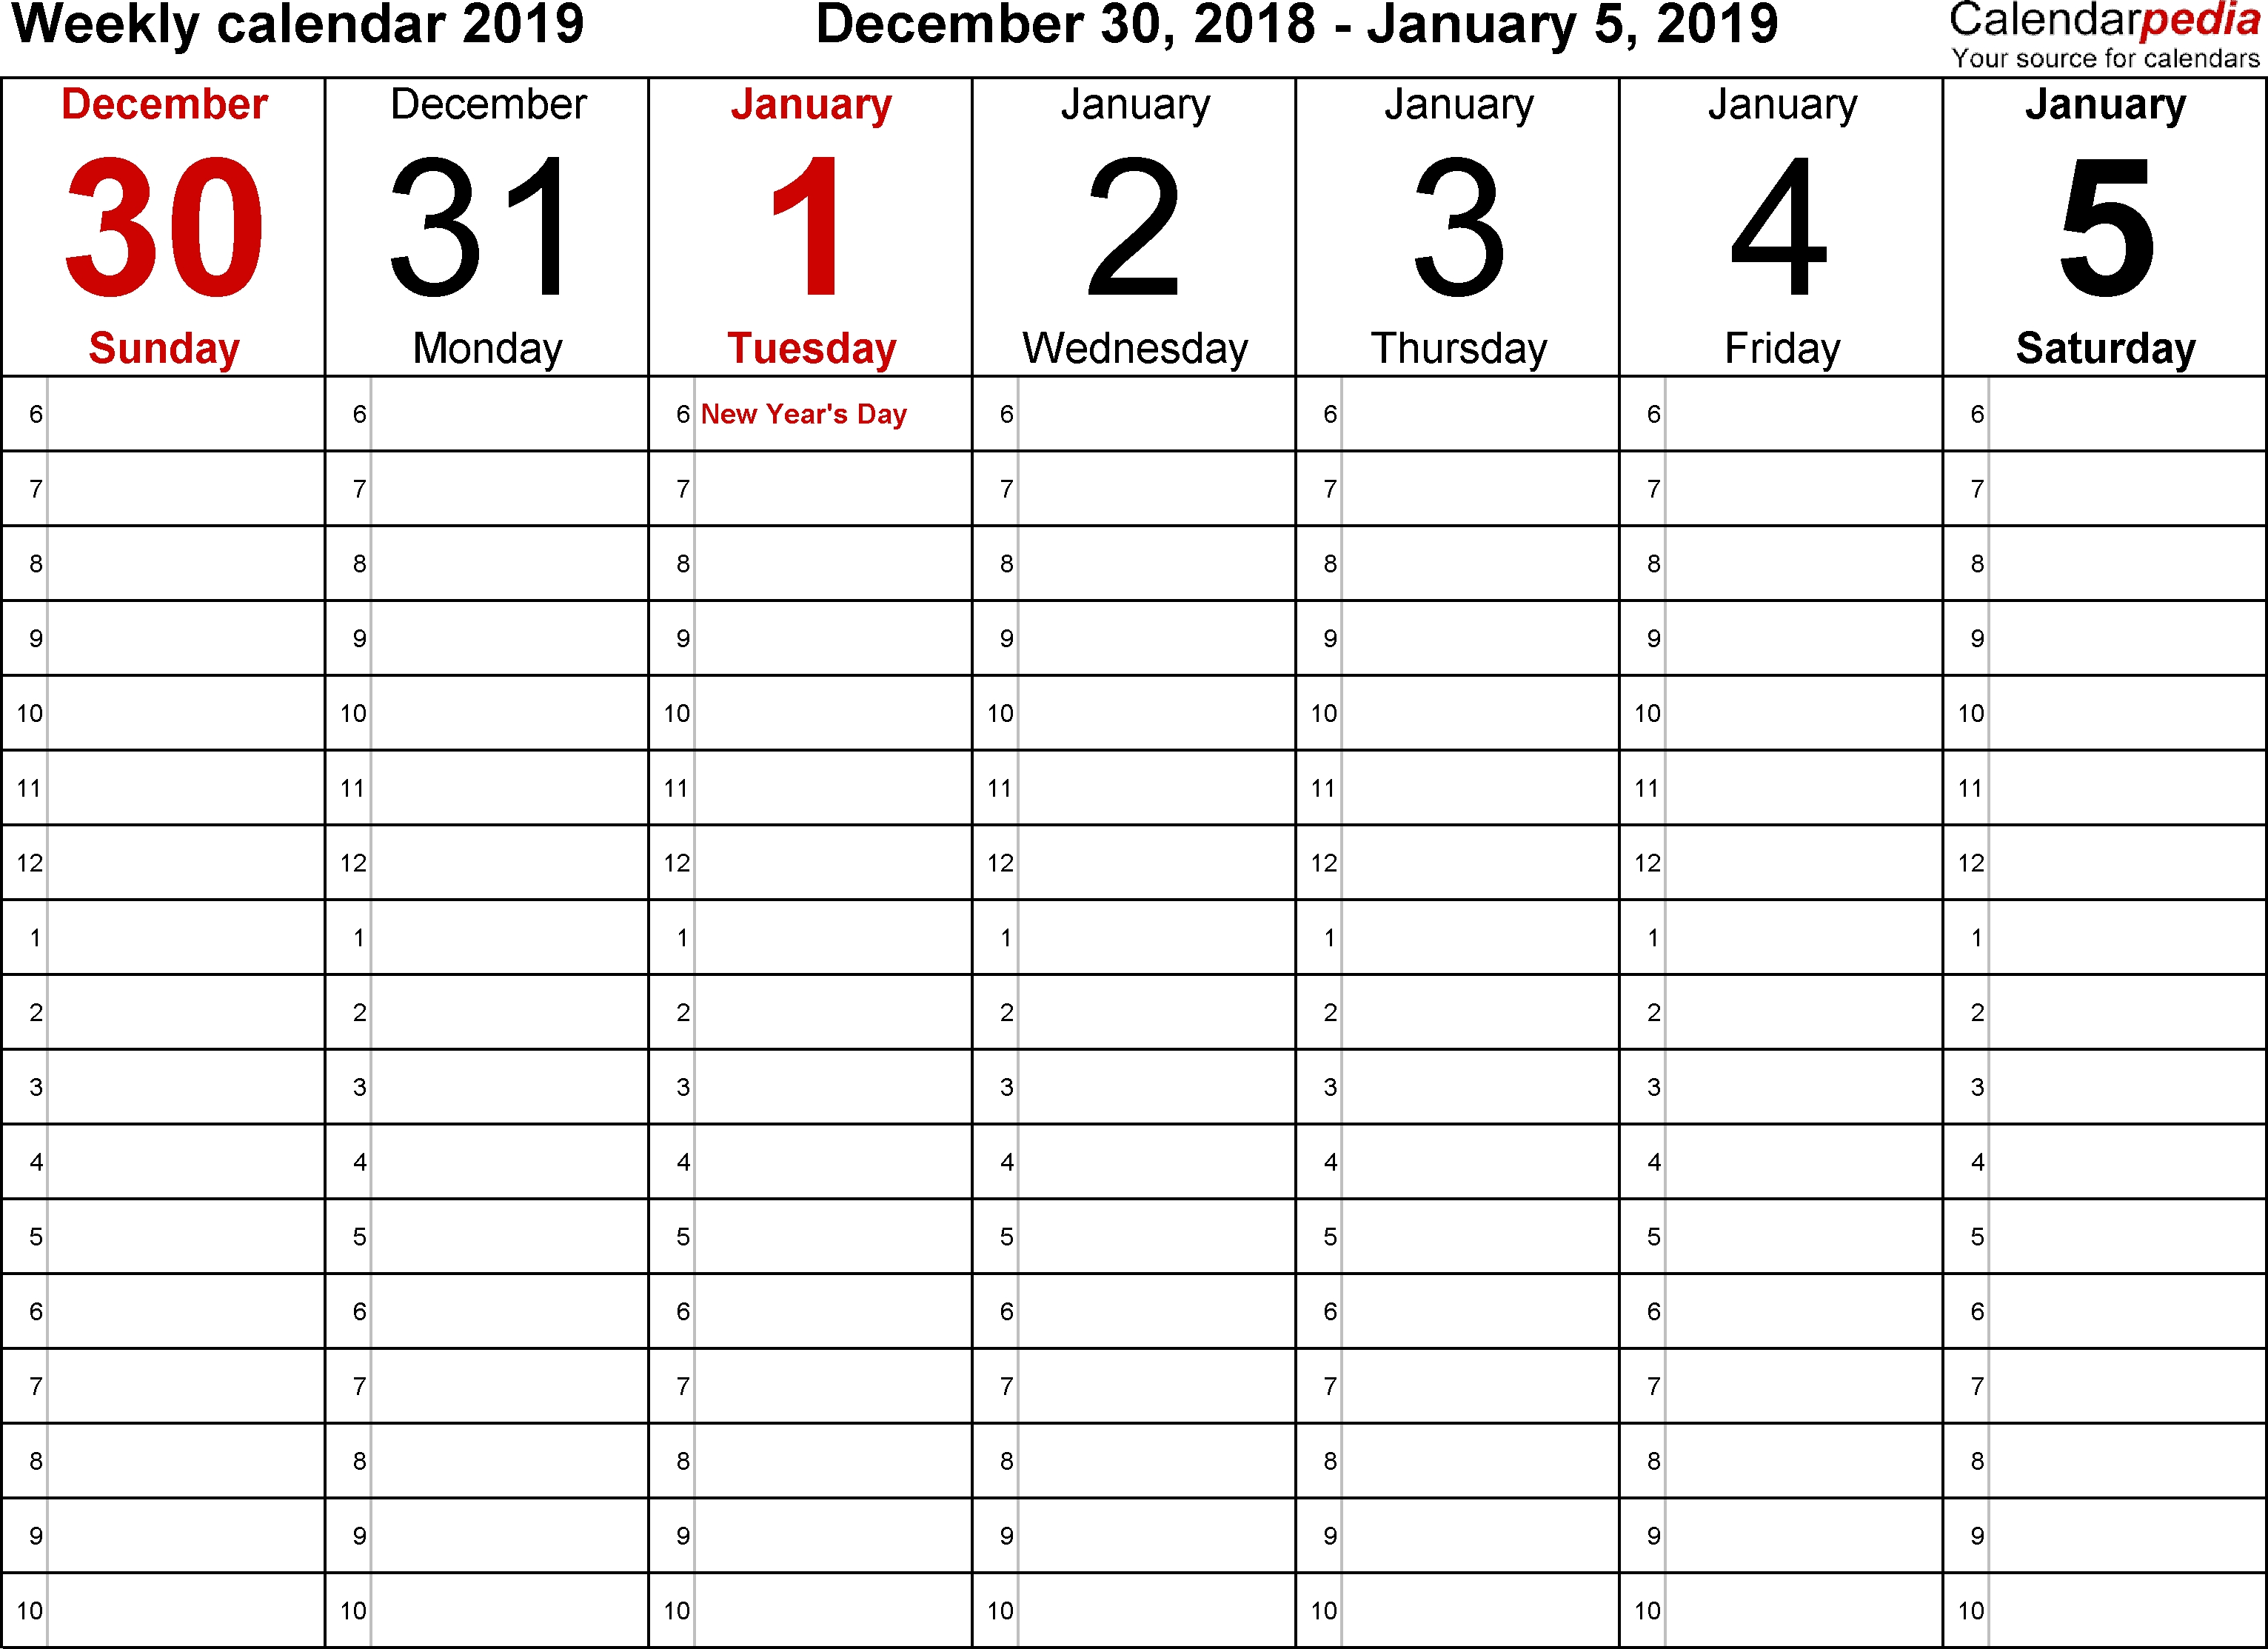 Weekly Calendar 2019 For Word - 12 Free Printable Templates in Blank Weekly Calender With Time